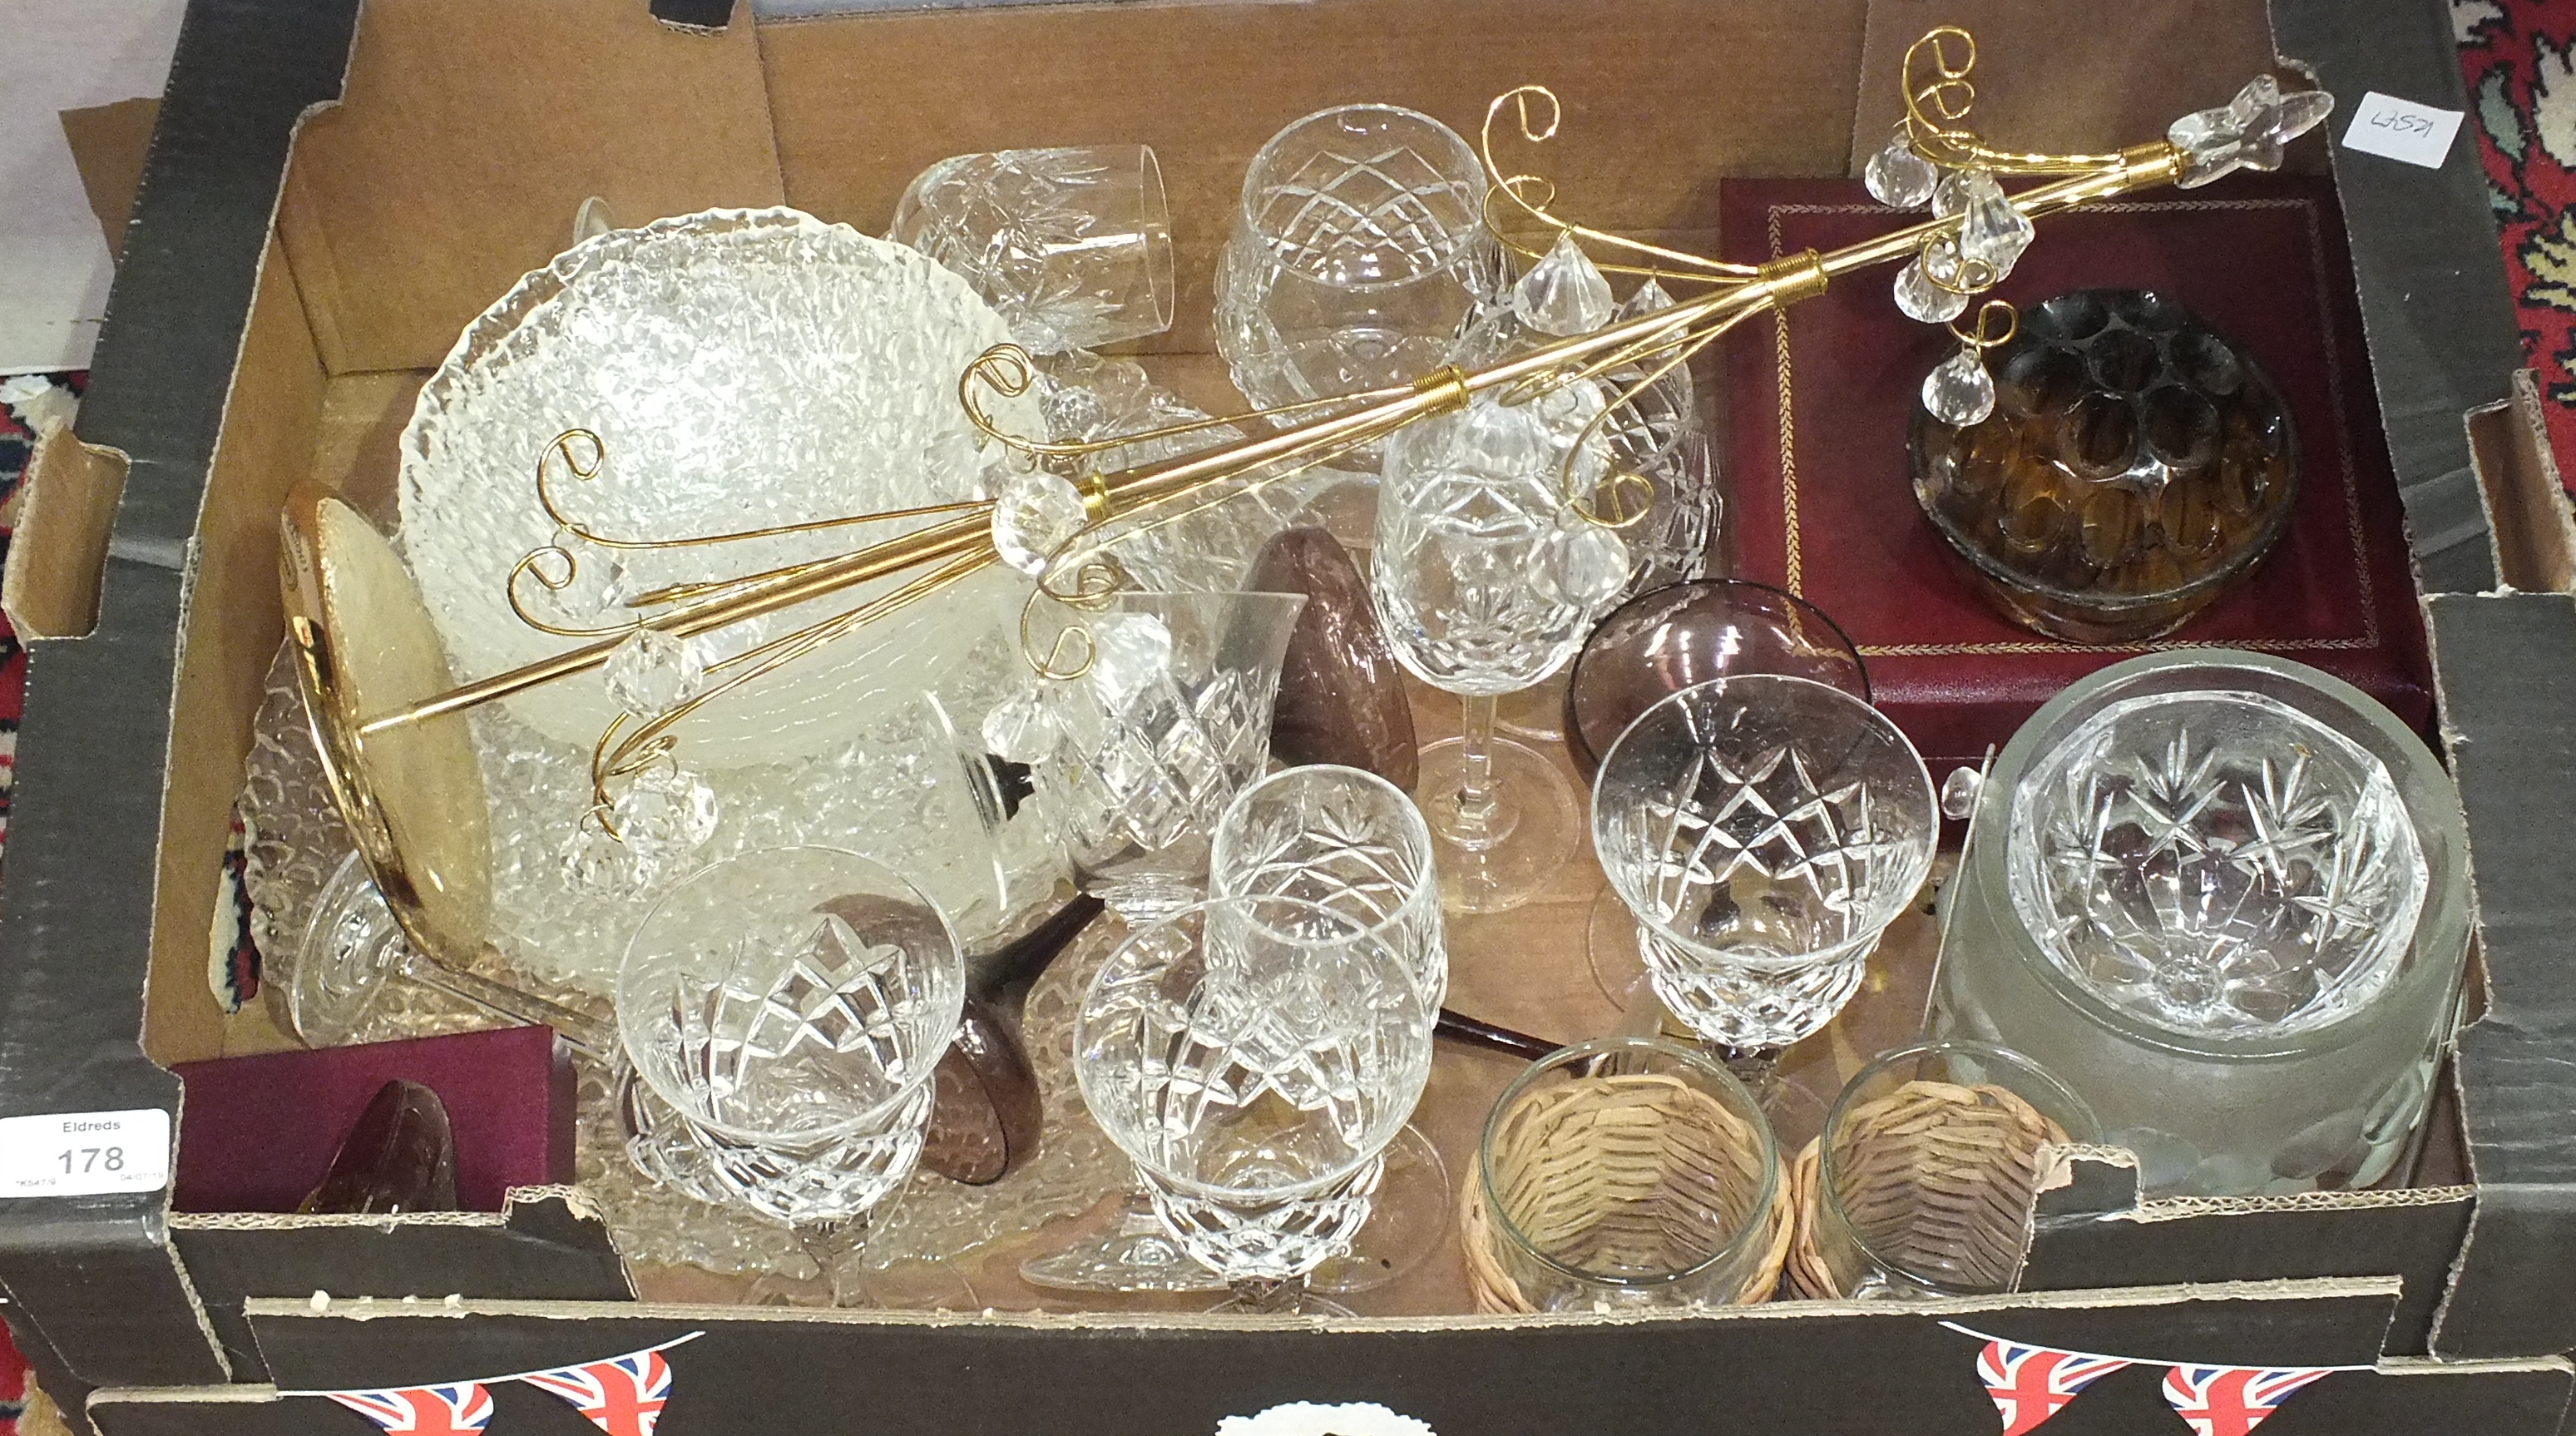 A collection of various glassware, including drinking glasses, decanters, vases, bowls, etc. - Image 2 of 3